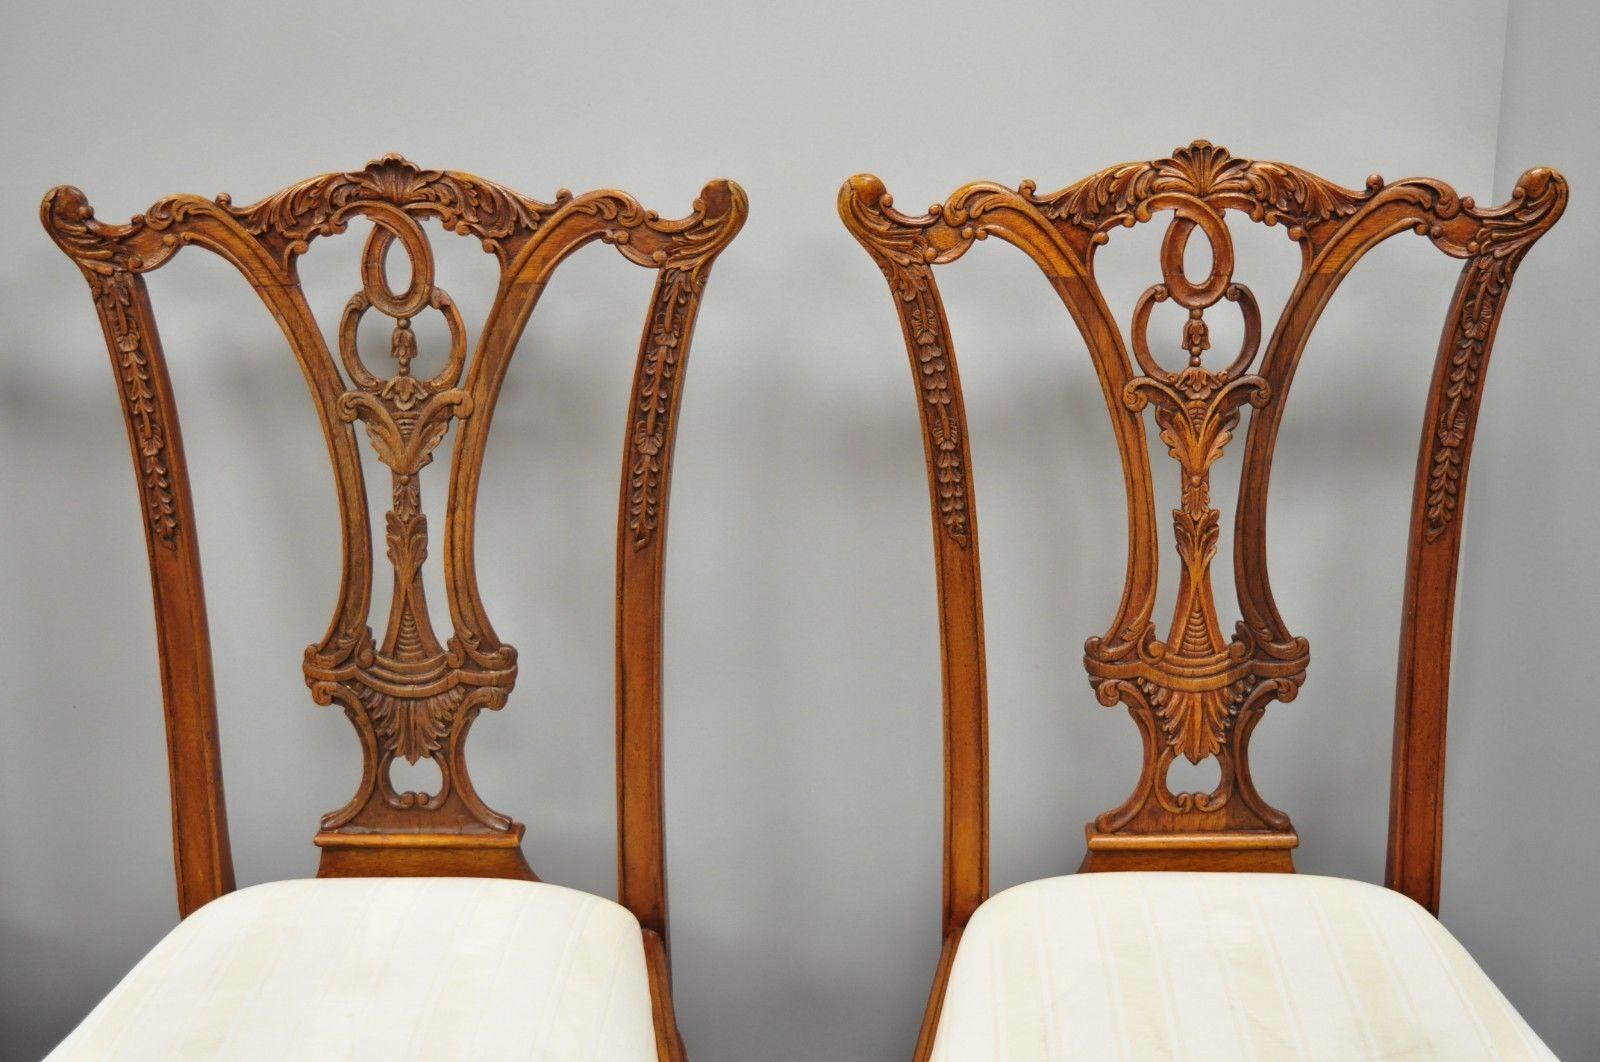 Set of 4 reproduction Chippendale style mahogany ball and claw dining chairs. Listing includes 4 Chippendale style side chairs, solid wood construction, beautiful wood grain, upholstered seats, nicely carved details, and carved ball and claw feet,